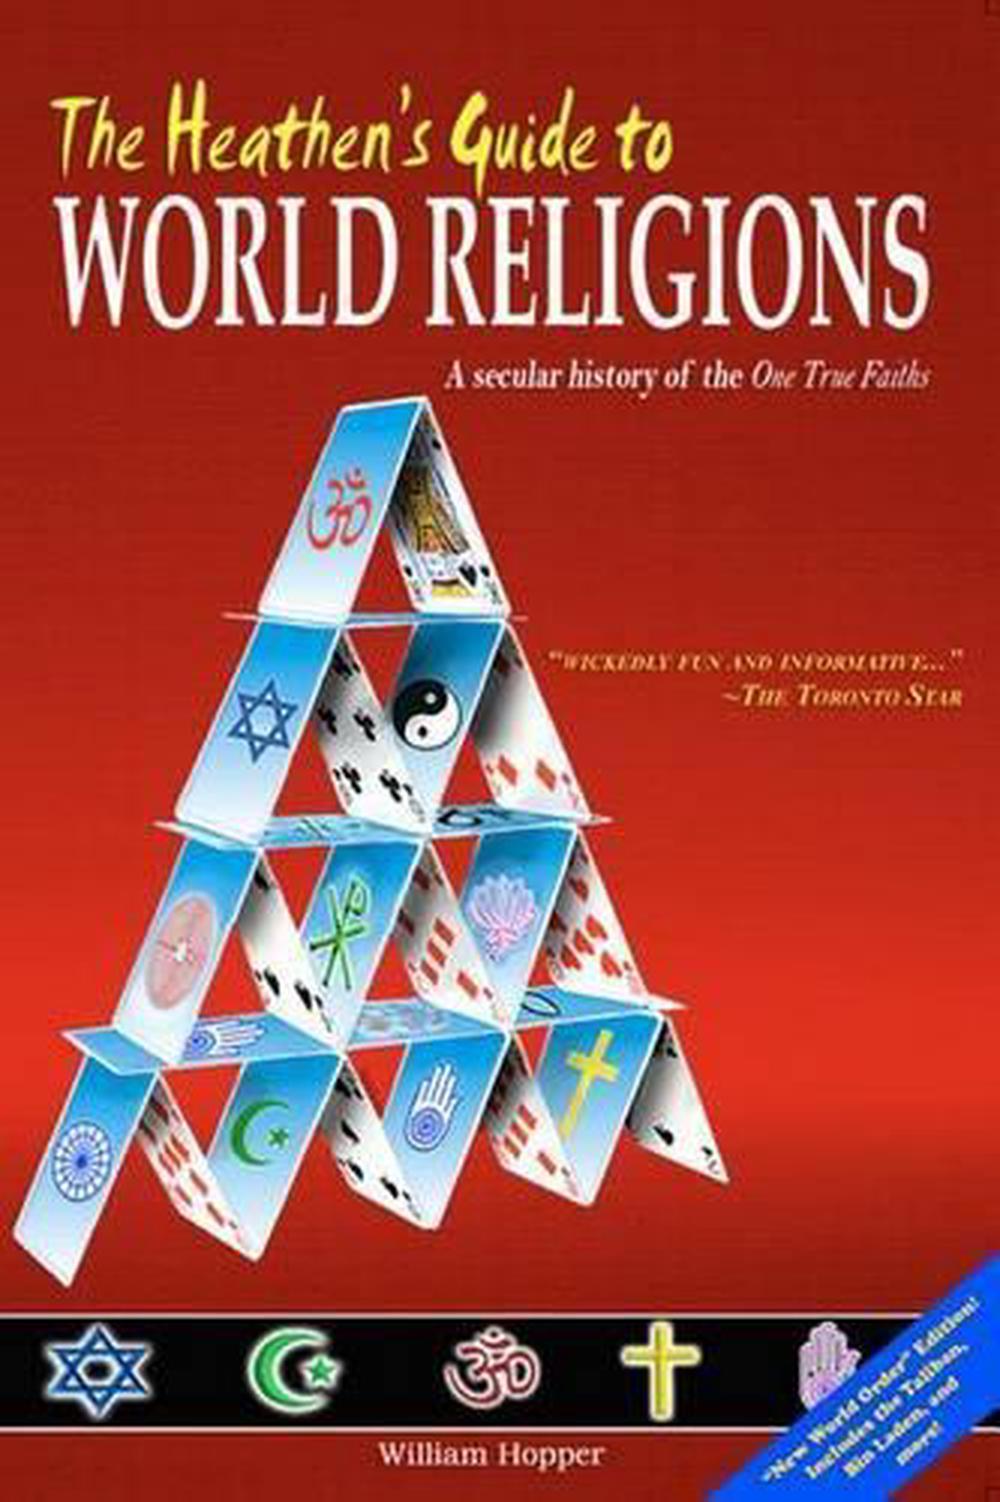 The Heathen's Guide to World Religions A Secular History of the 'One